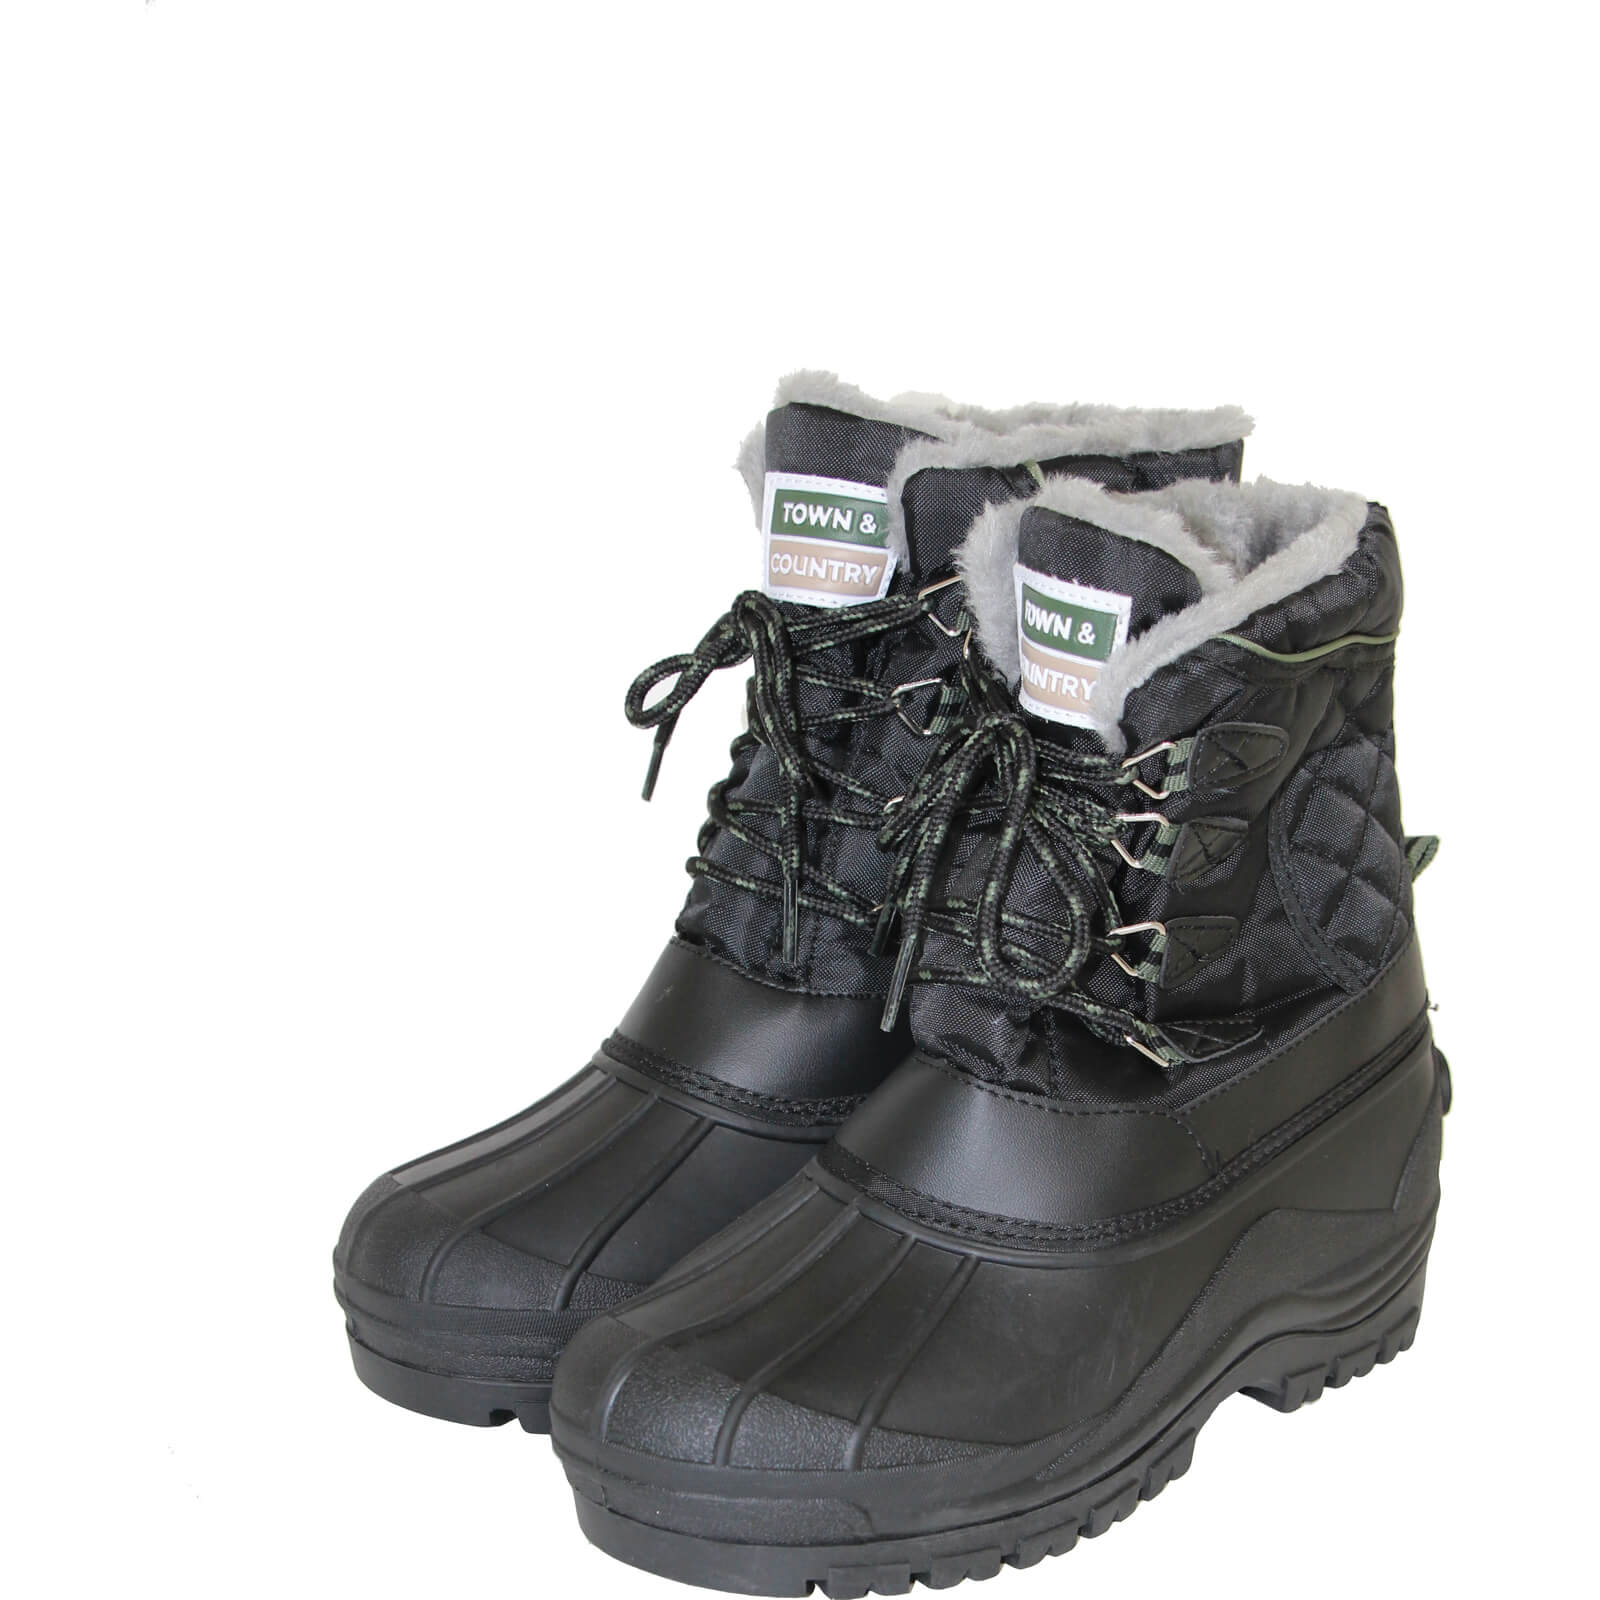 Image of Town and Country Curbridge Waterproof Lined Winter Boots Black Size 4